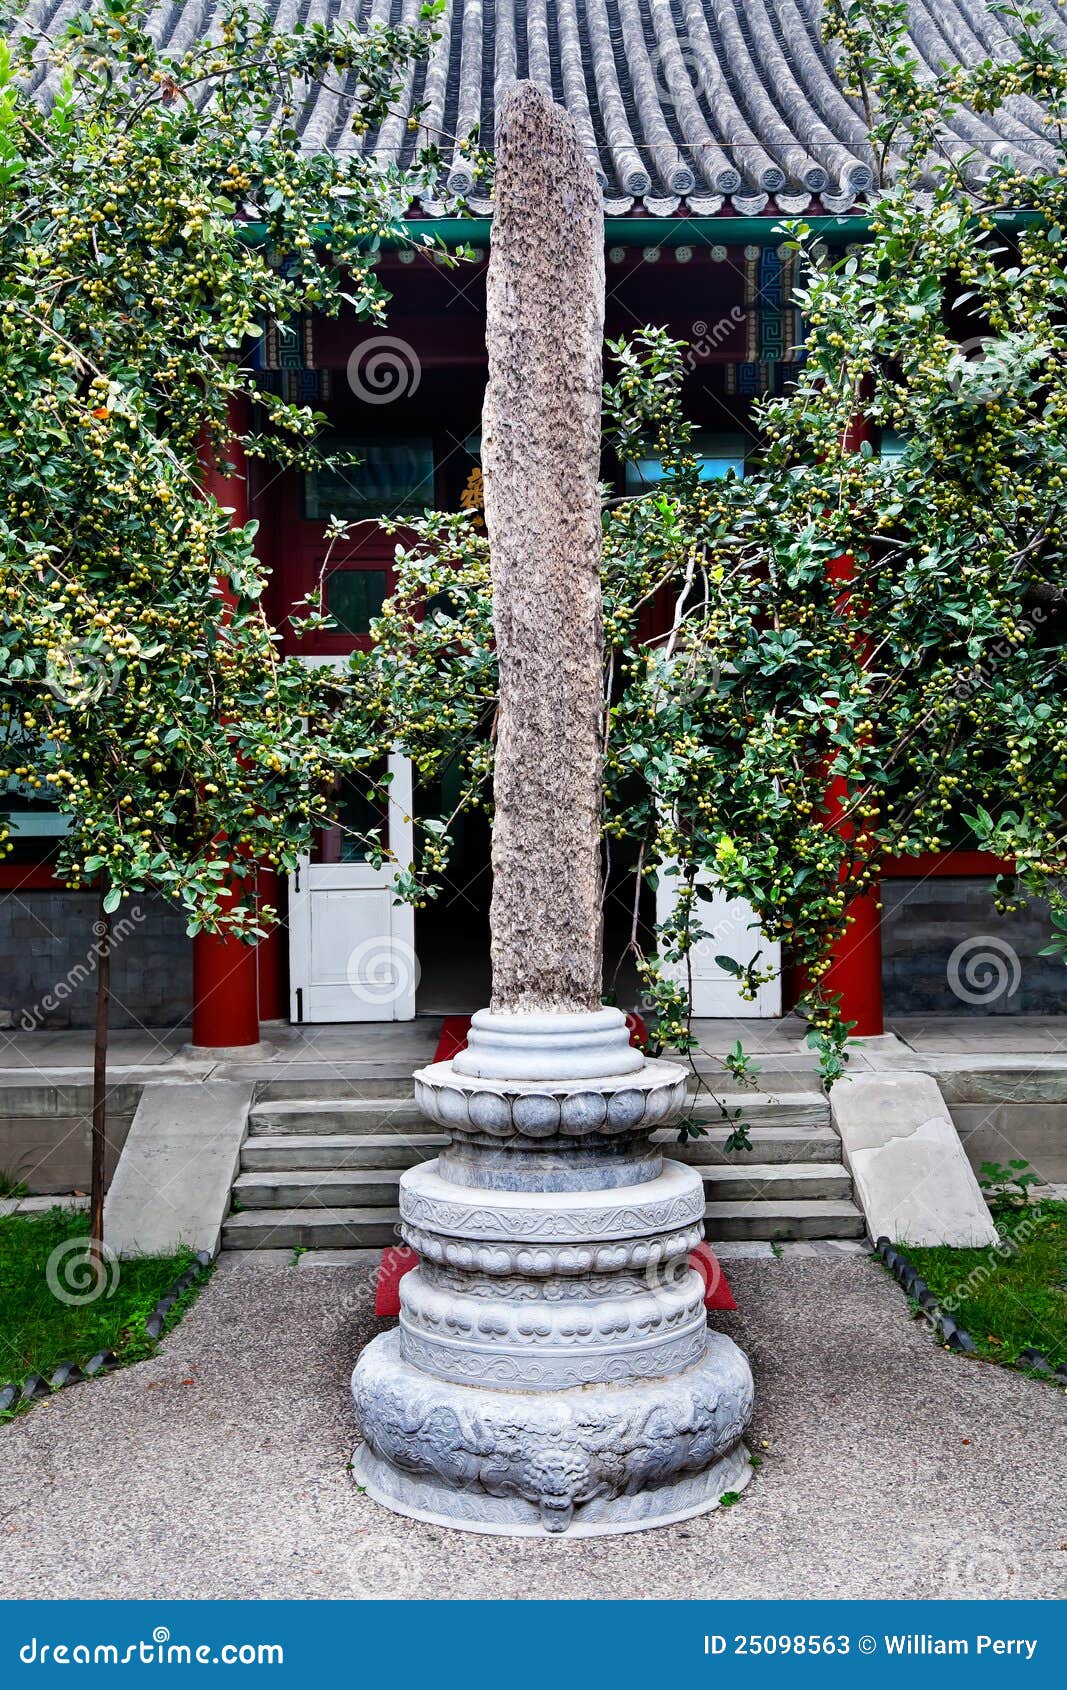 stone monument soong ching-ling residence beijing